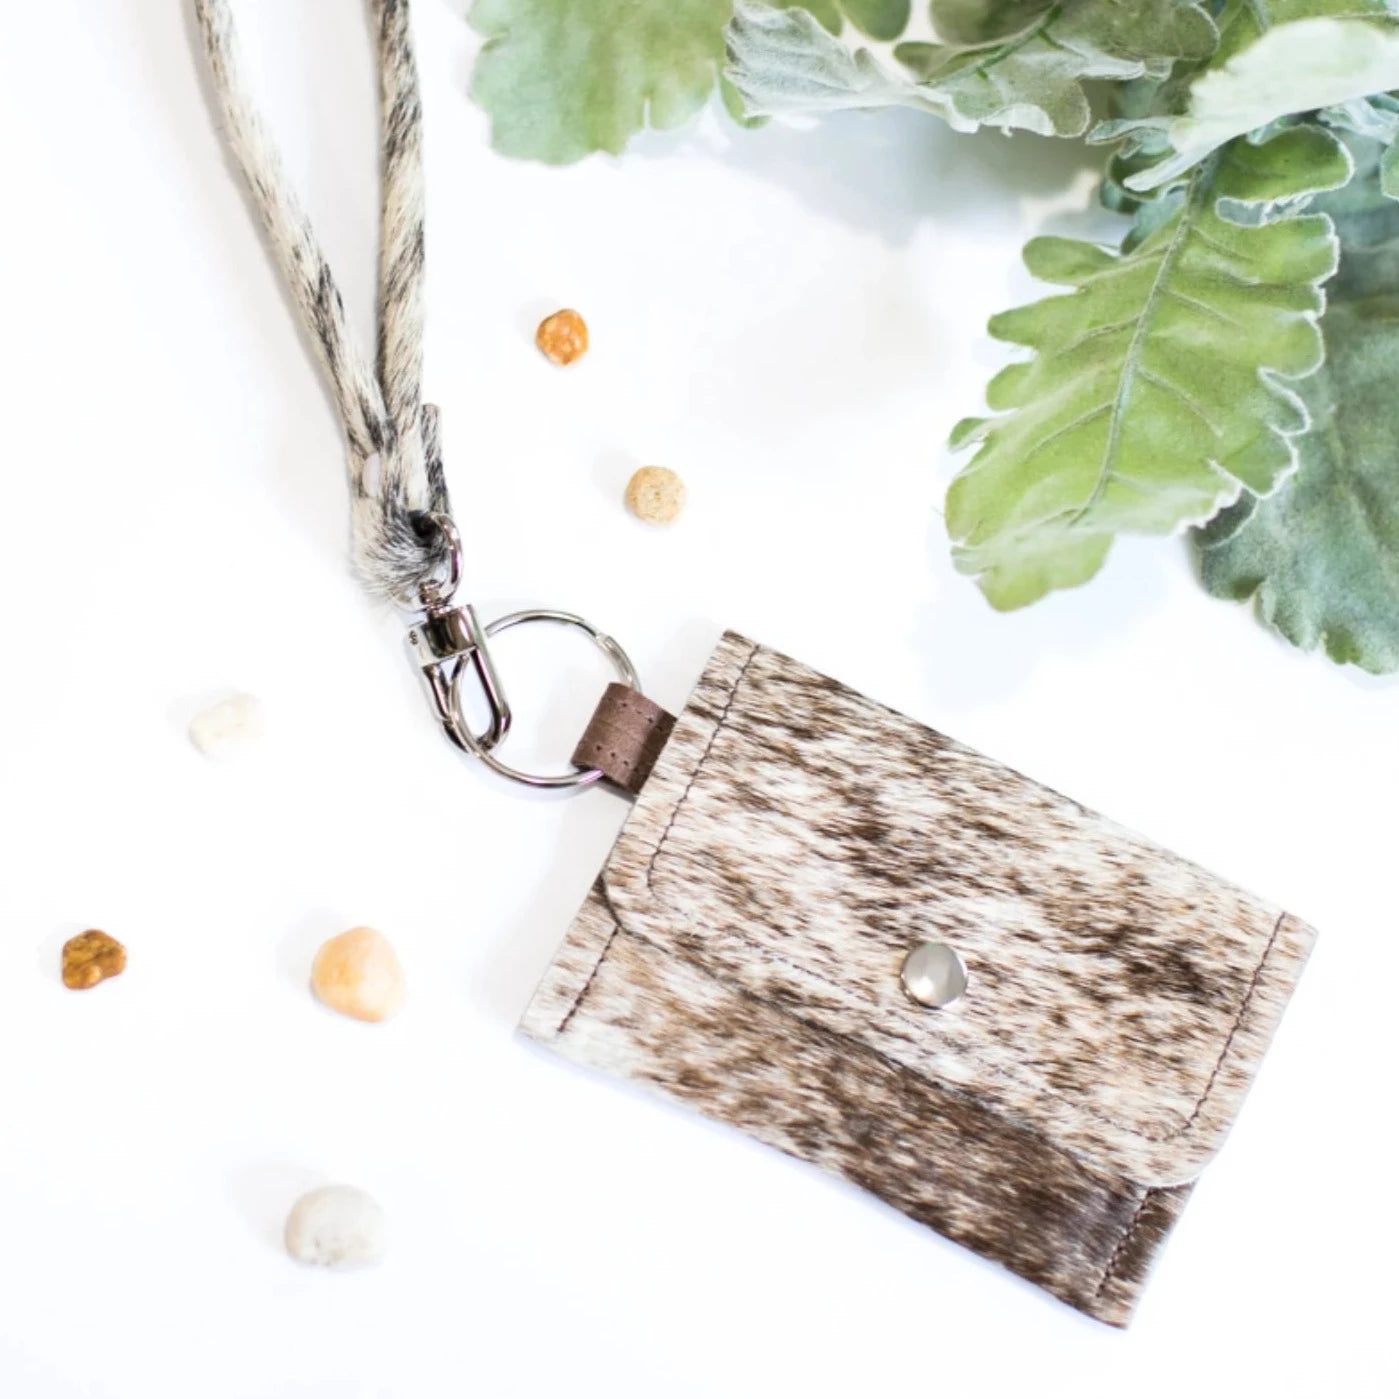 Keychain Wallet - Cowhide & Leather